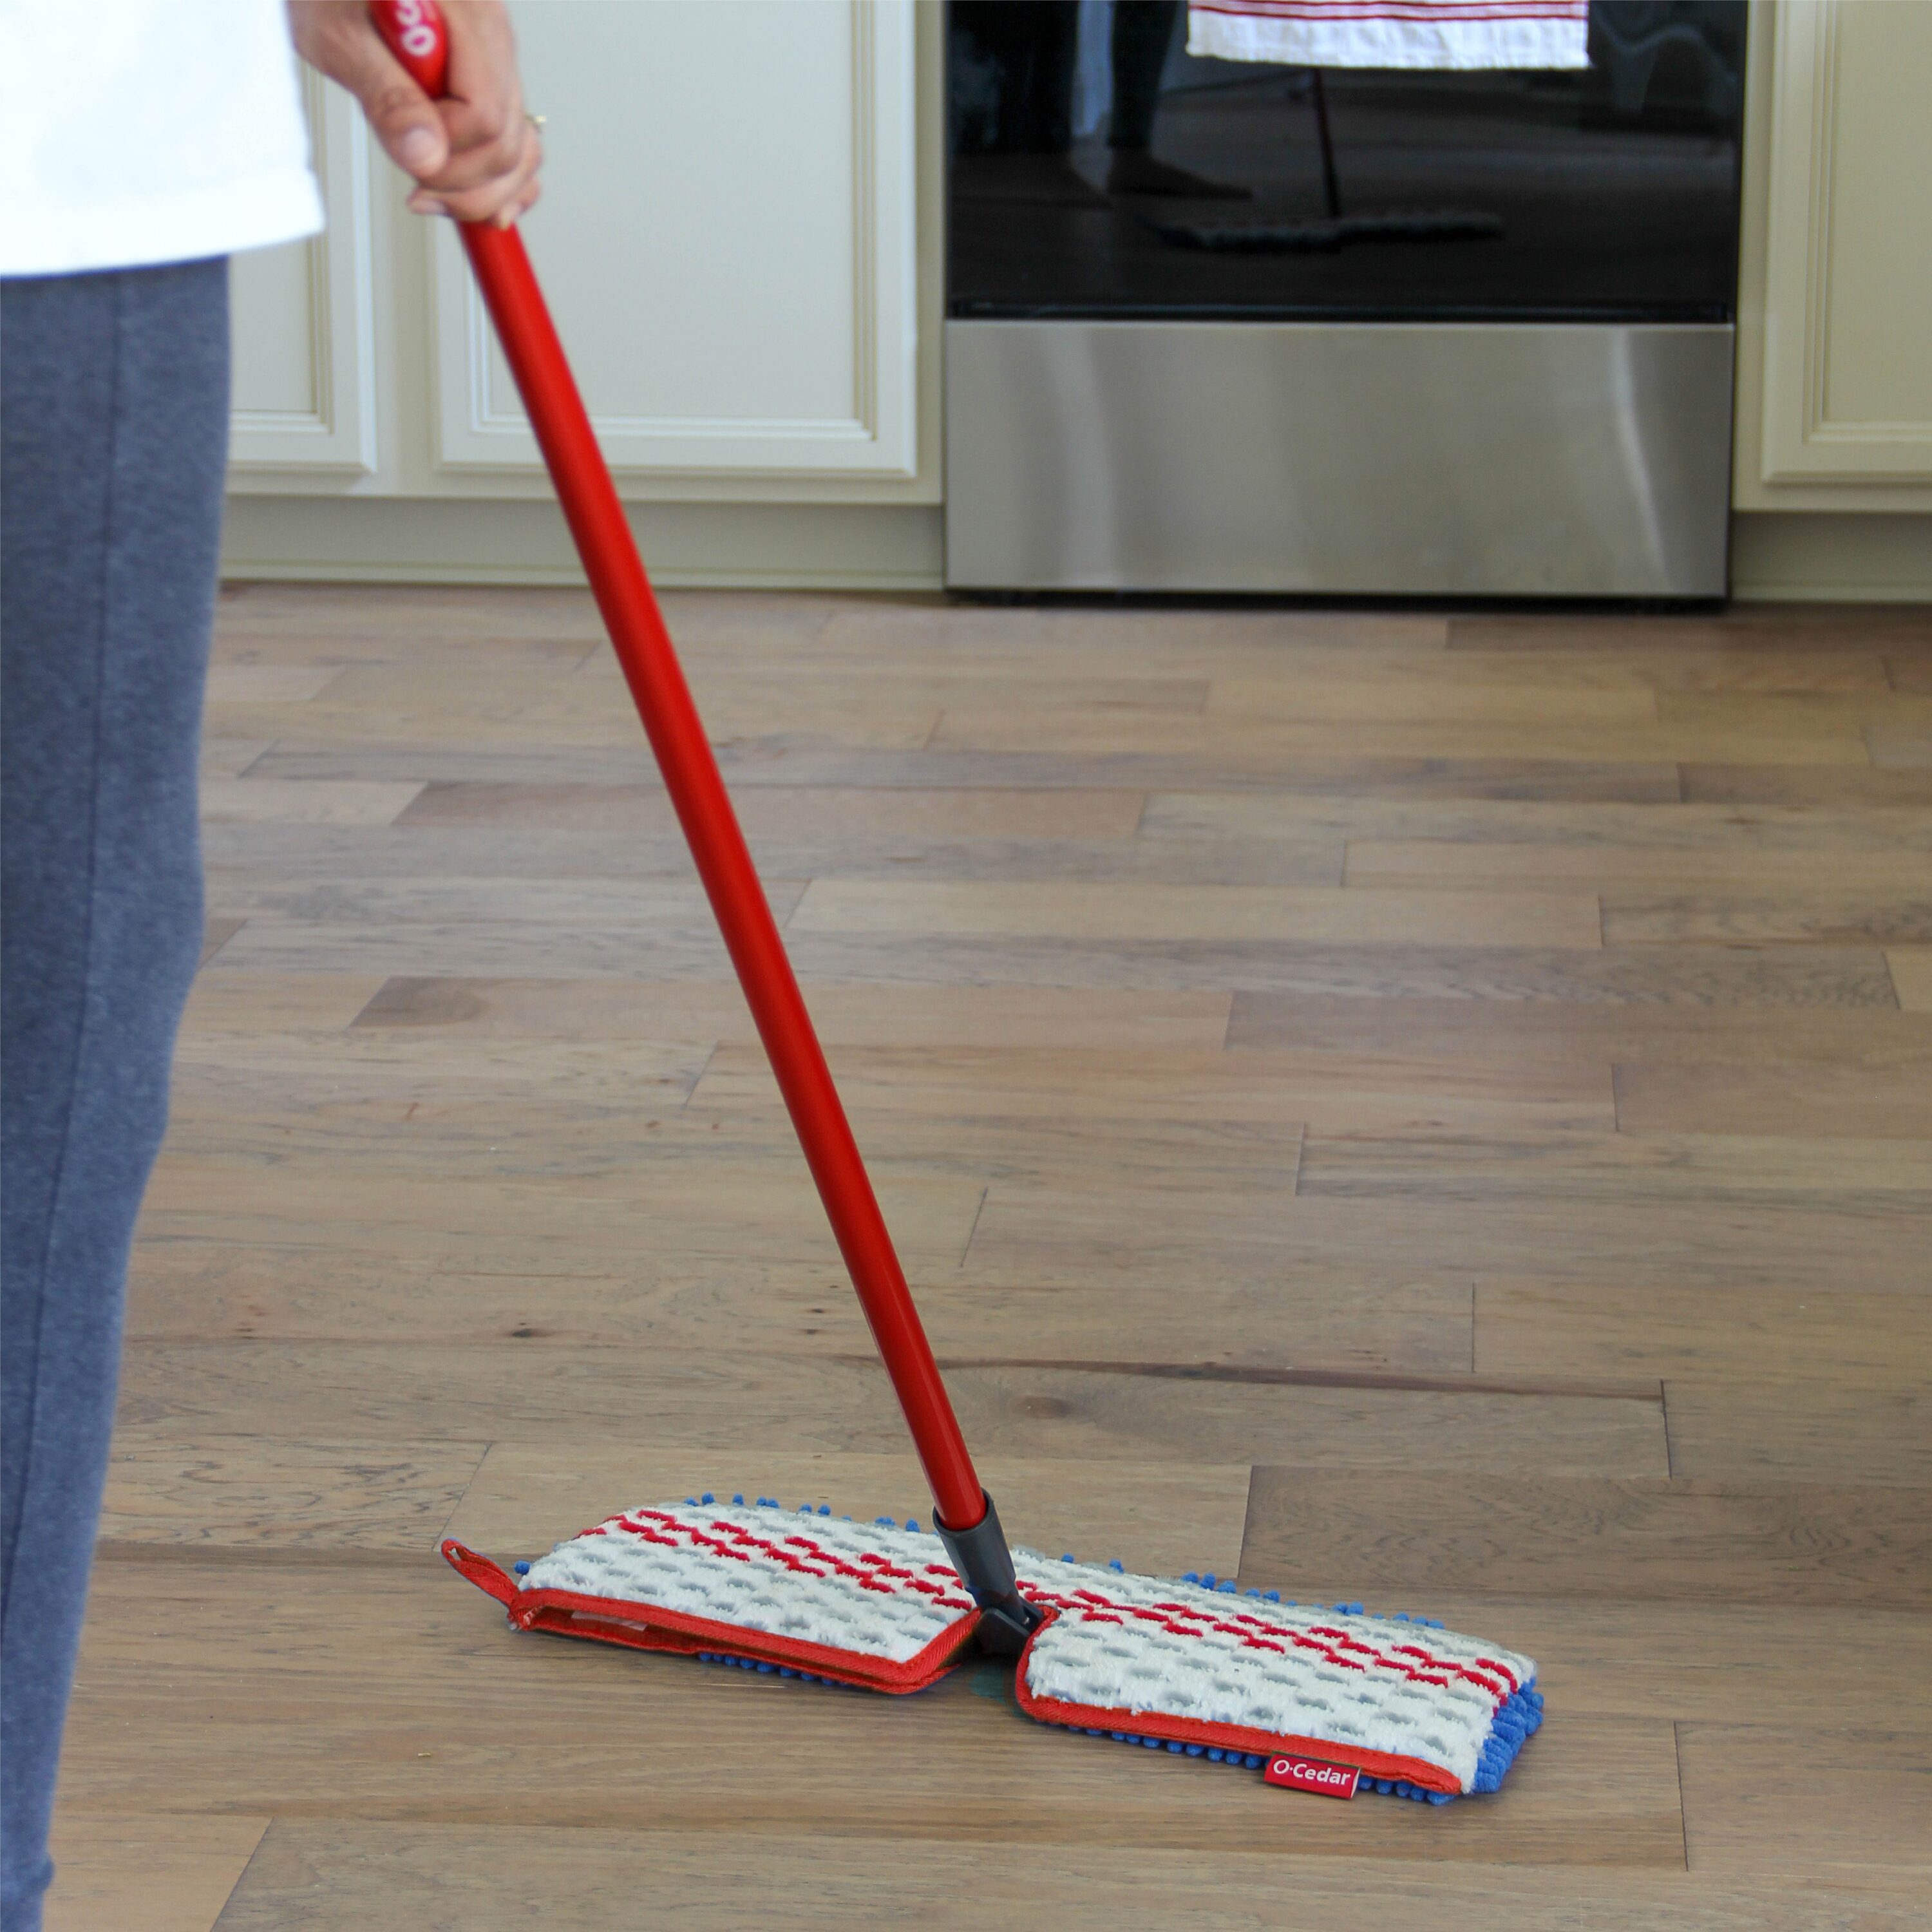 How Often Should You Mop Hardwood Floors? – From The Forest, LLC